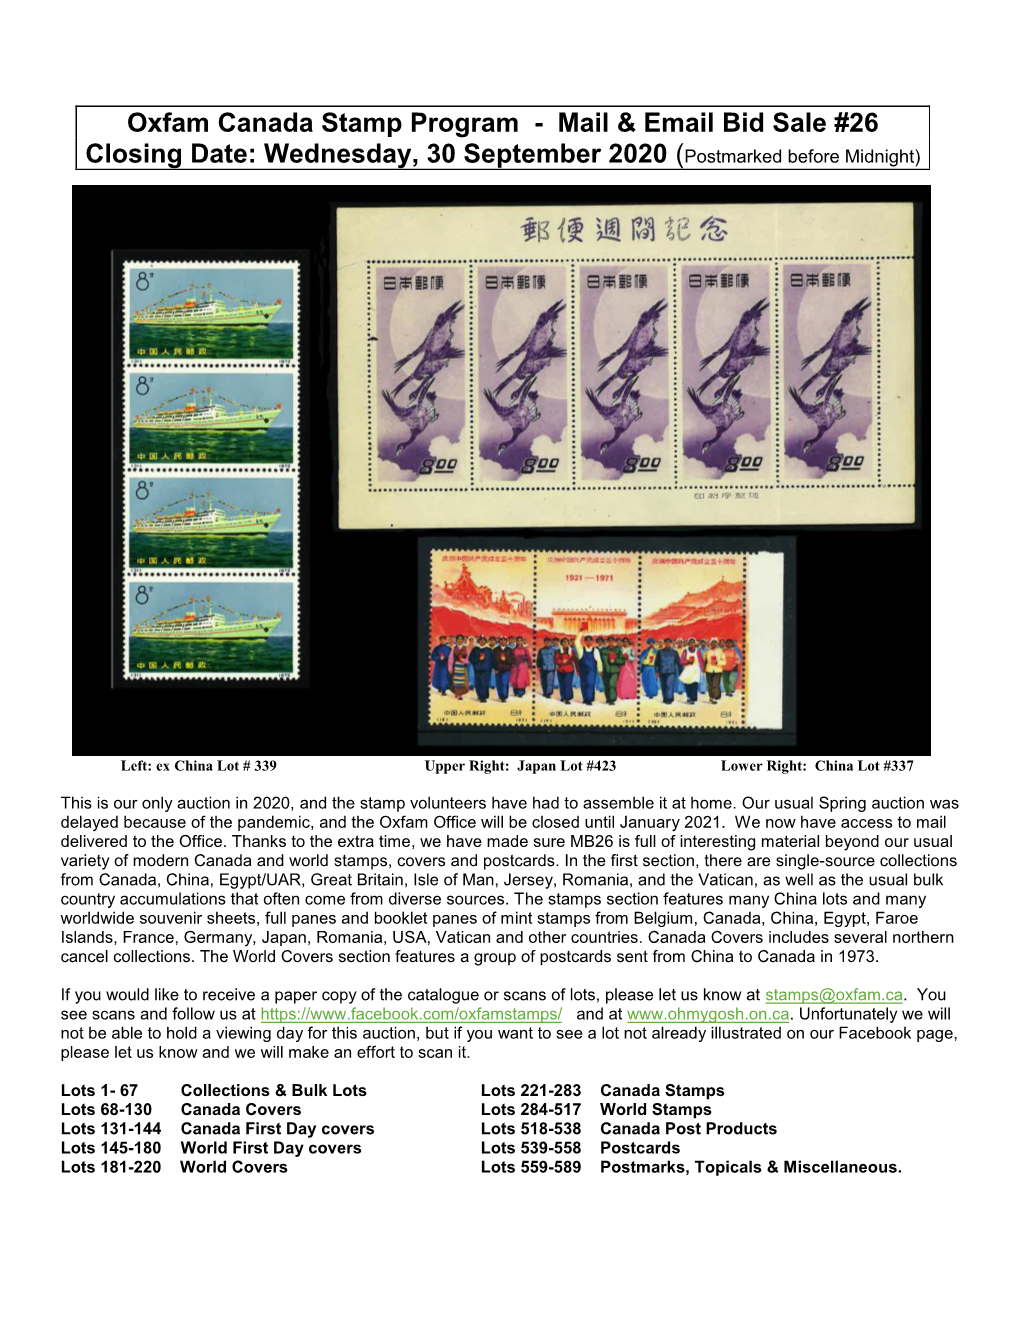 Oxfam Canada Stamp Program - Mail & Email Bid Sale #26 Closing Date: Wednesday, 30 September 2020 (Postmarked Before Midnight)